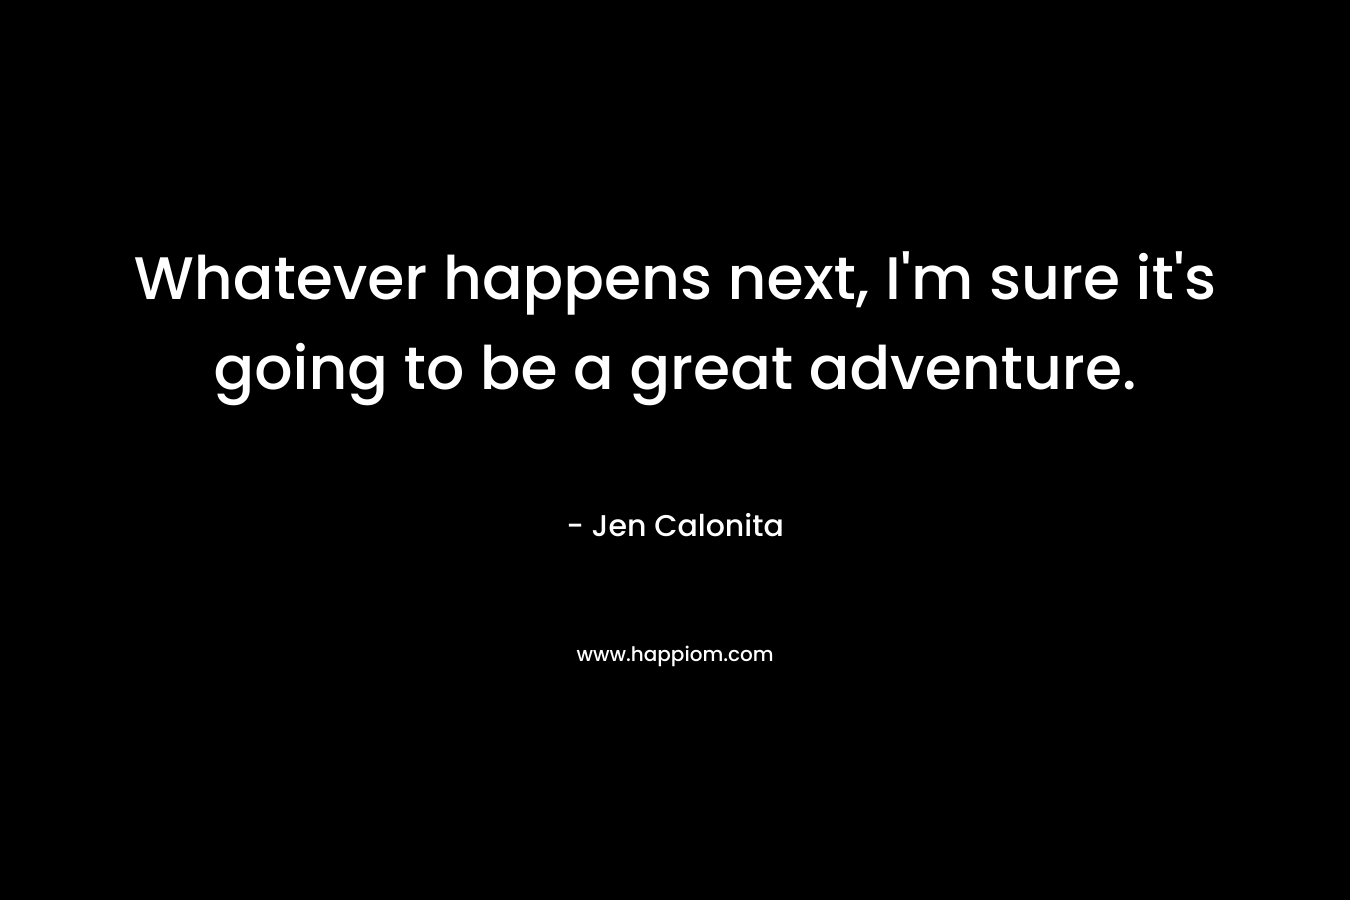 Whatever happens next, I’m sure it’s going to be a great adventure. – Jen Calonita